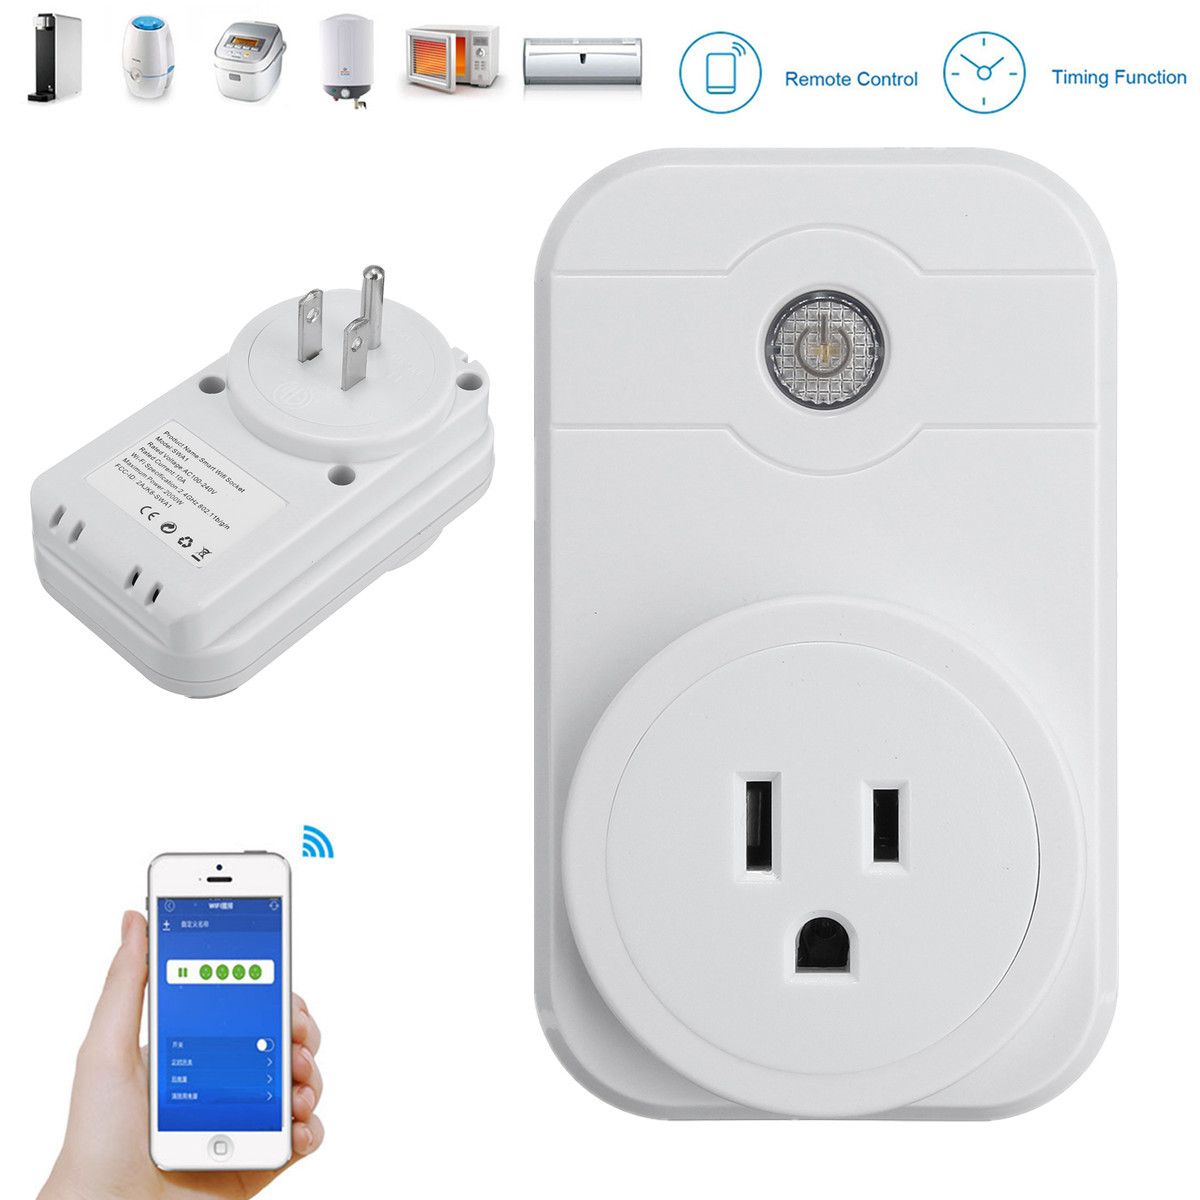 SW1 Wireless WIFI Socket Androind/iOS Phone Remote Control Smart Timer Socket Switch US Plug 2